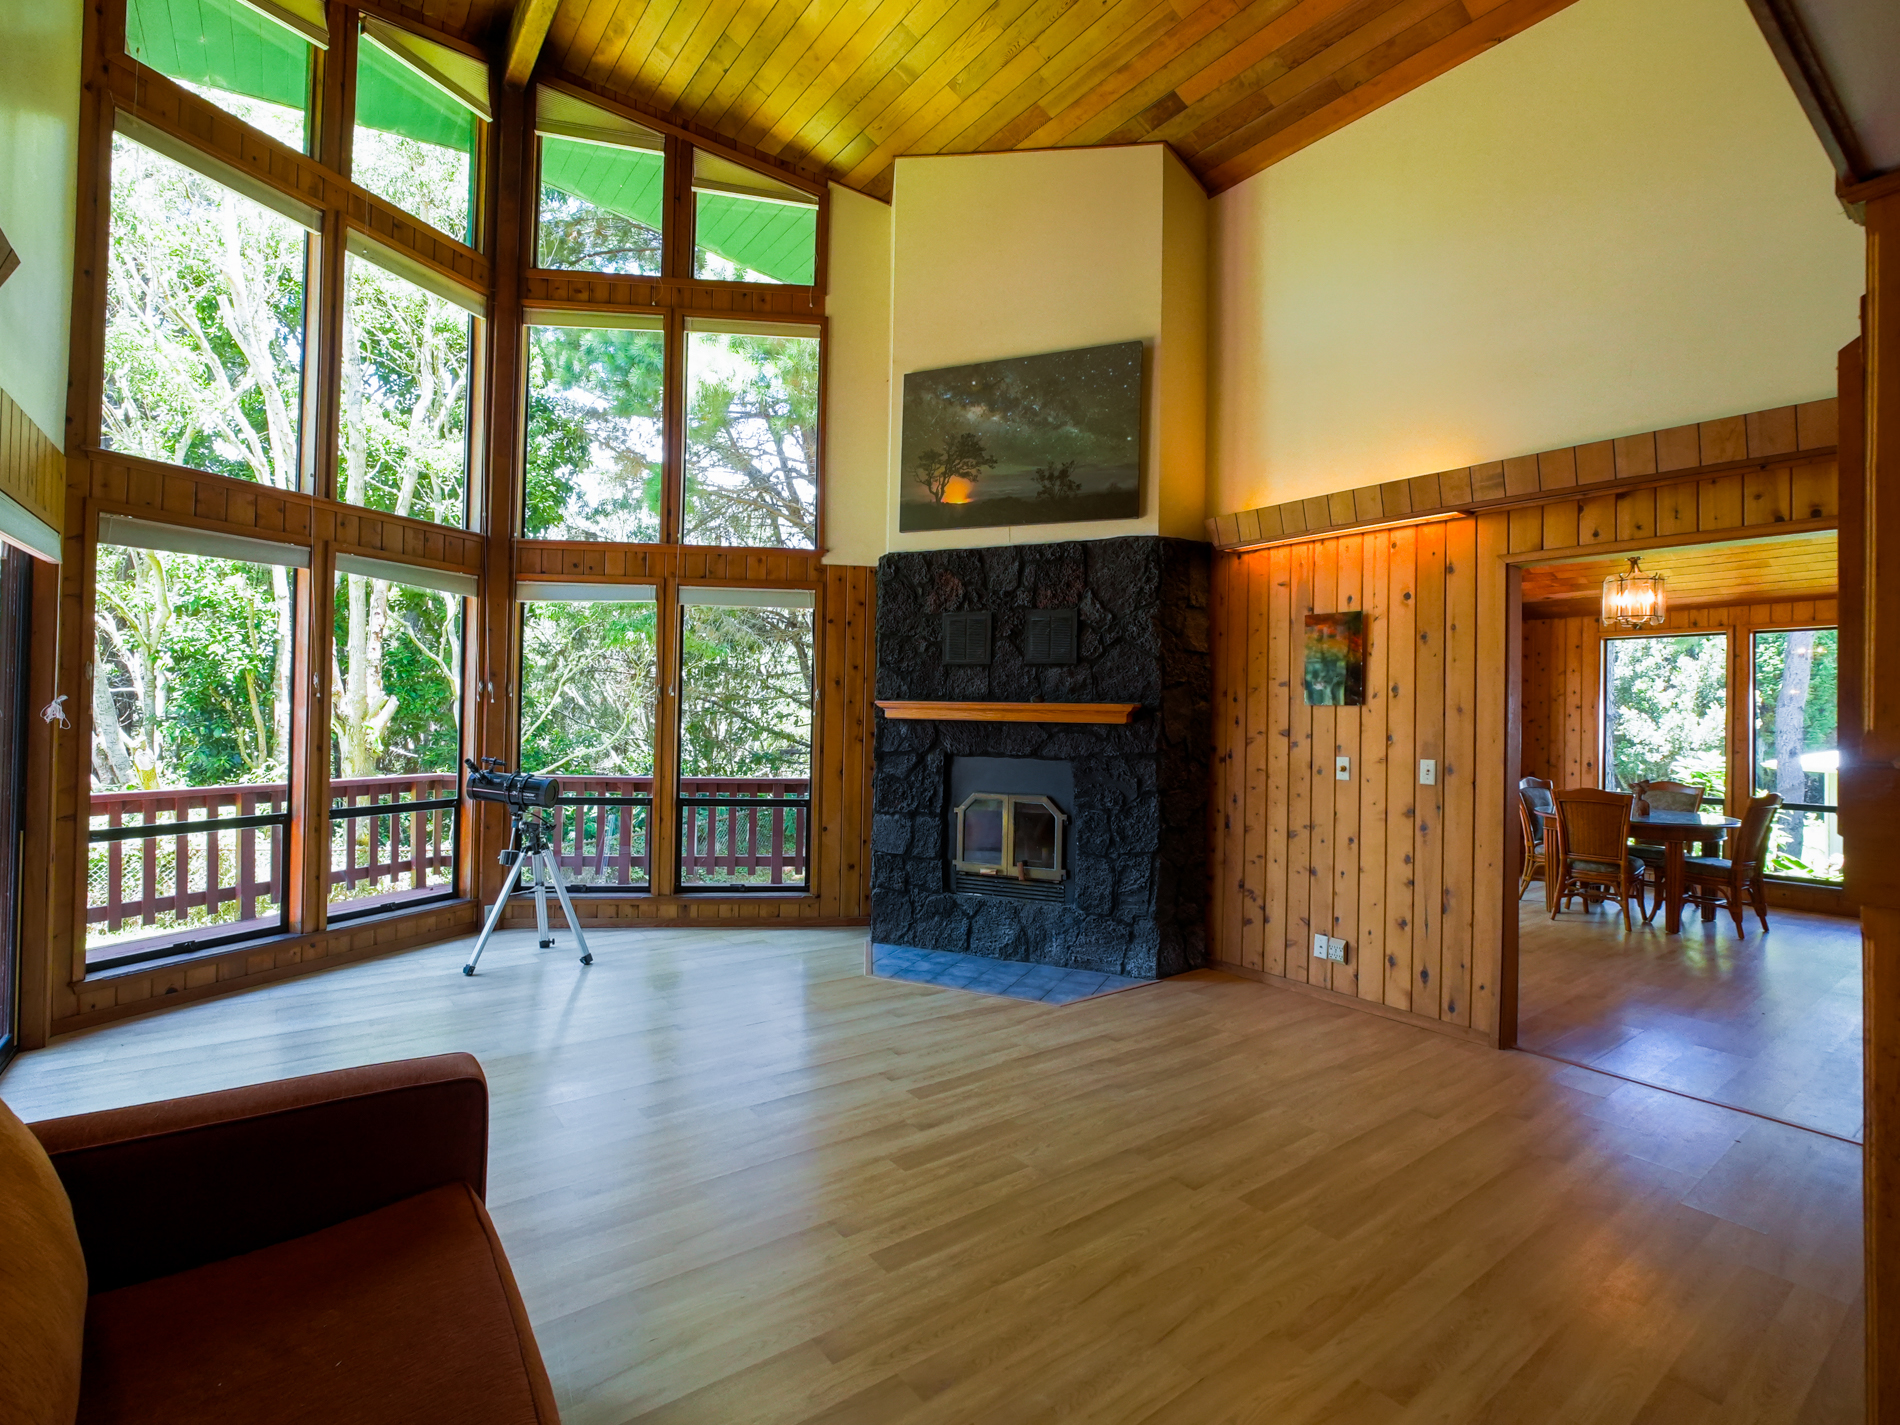 Windows...windows and more majestic windows to enjoy your view and an incredible lava rock fireplace (on those nights, a little ambience or warmth will fill the need......at 99-2034 Popohau Pl